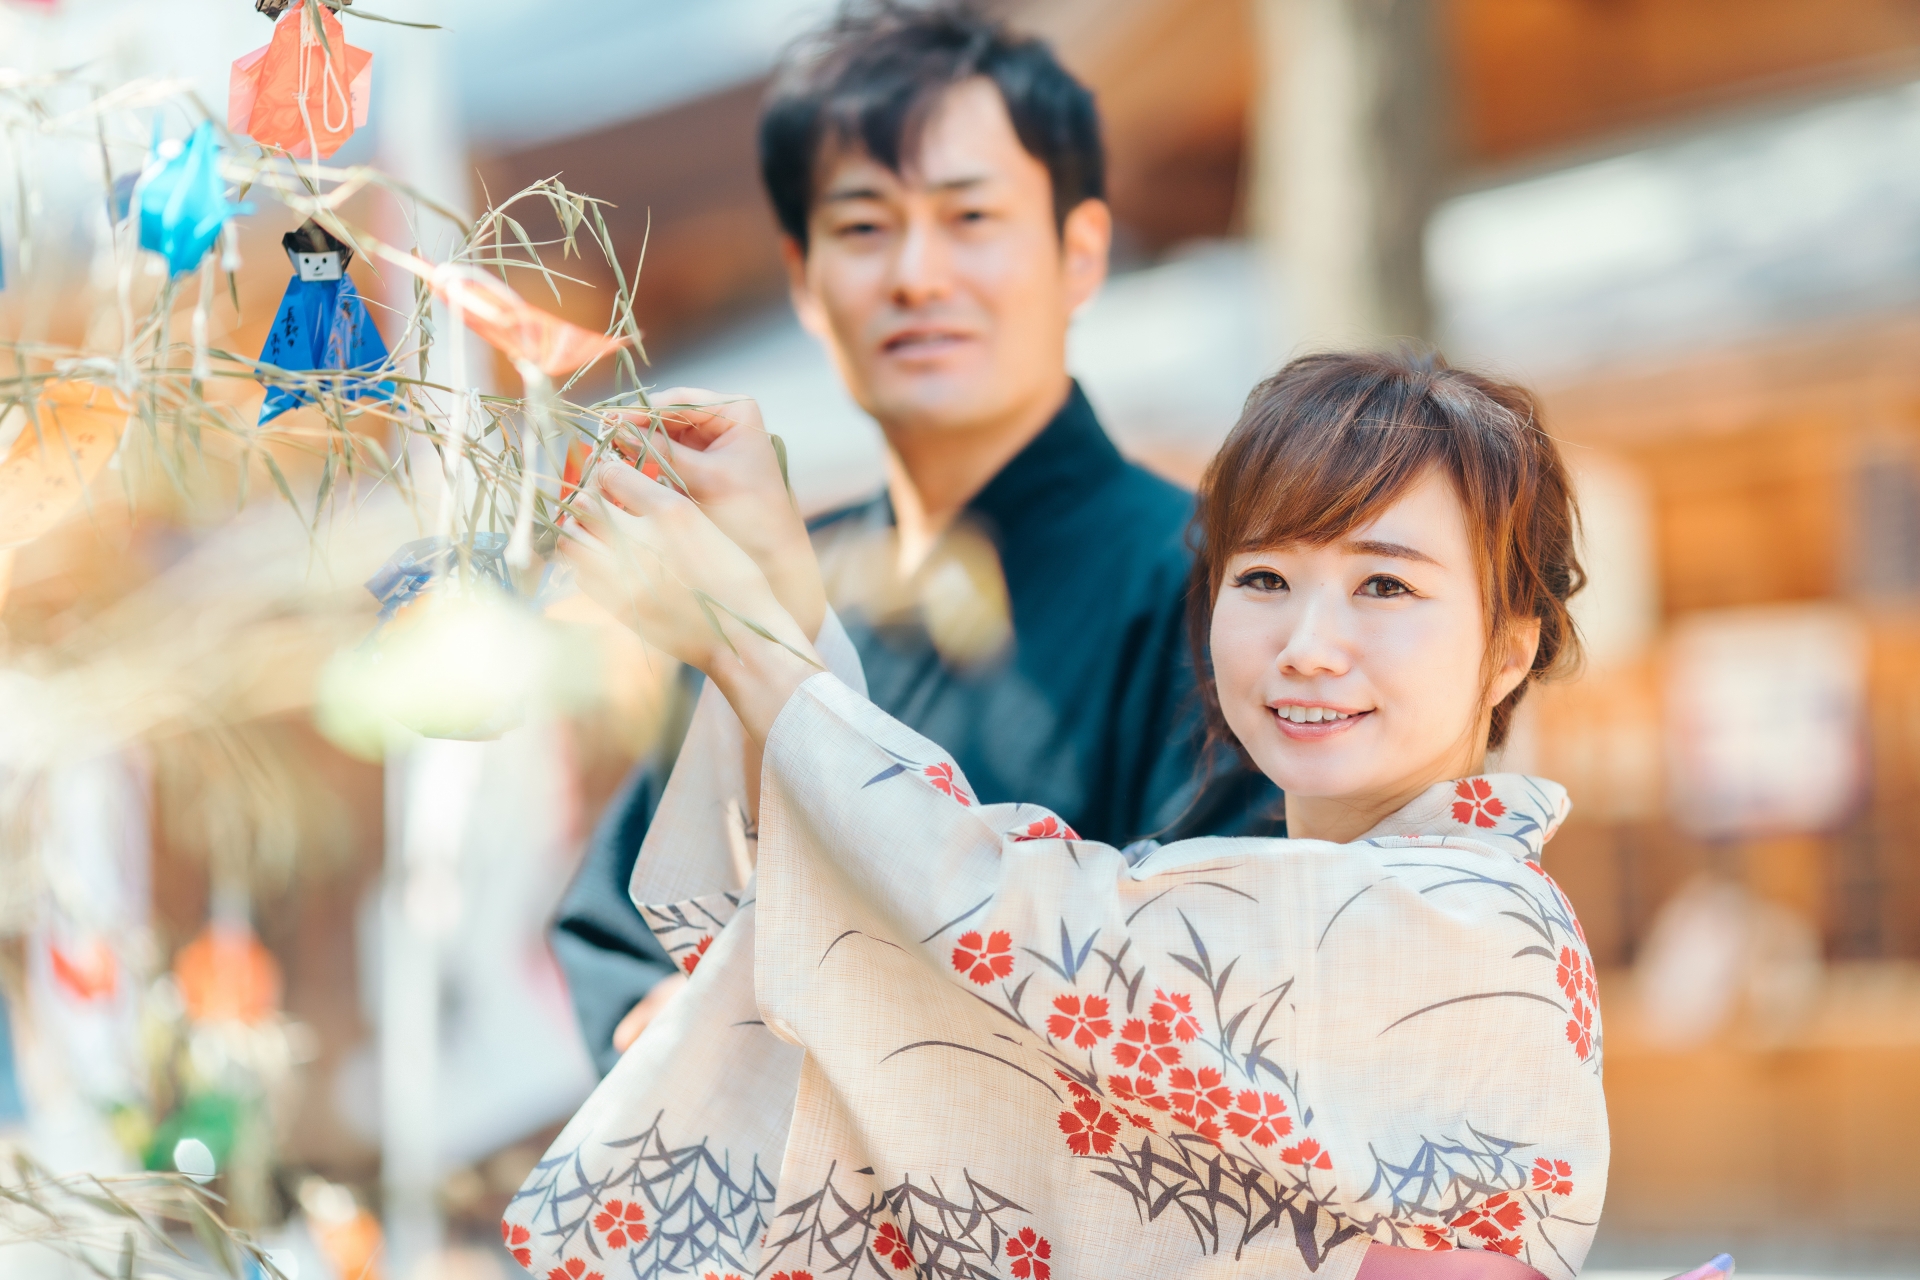 Read more about the article “Tanabata” celebration in Japan